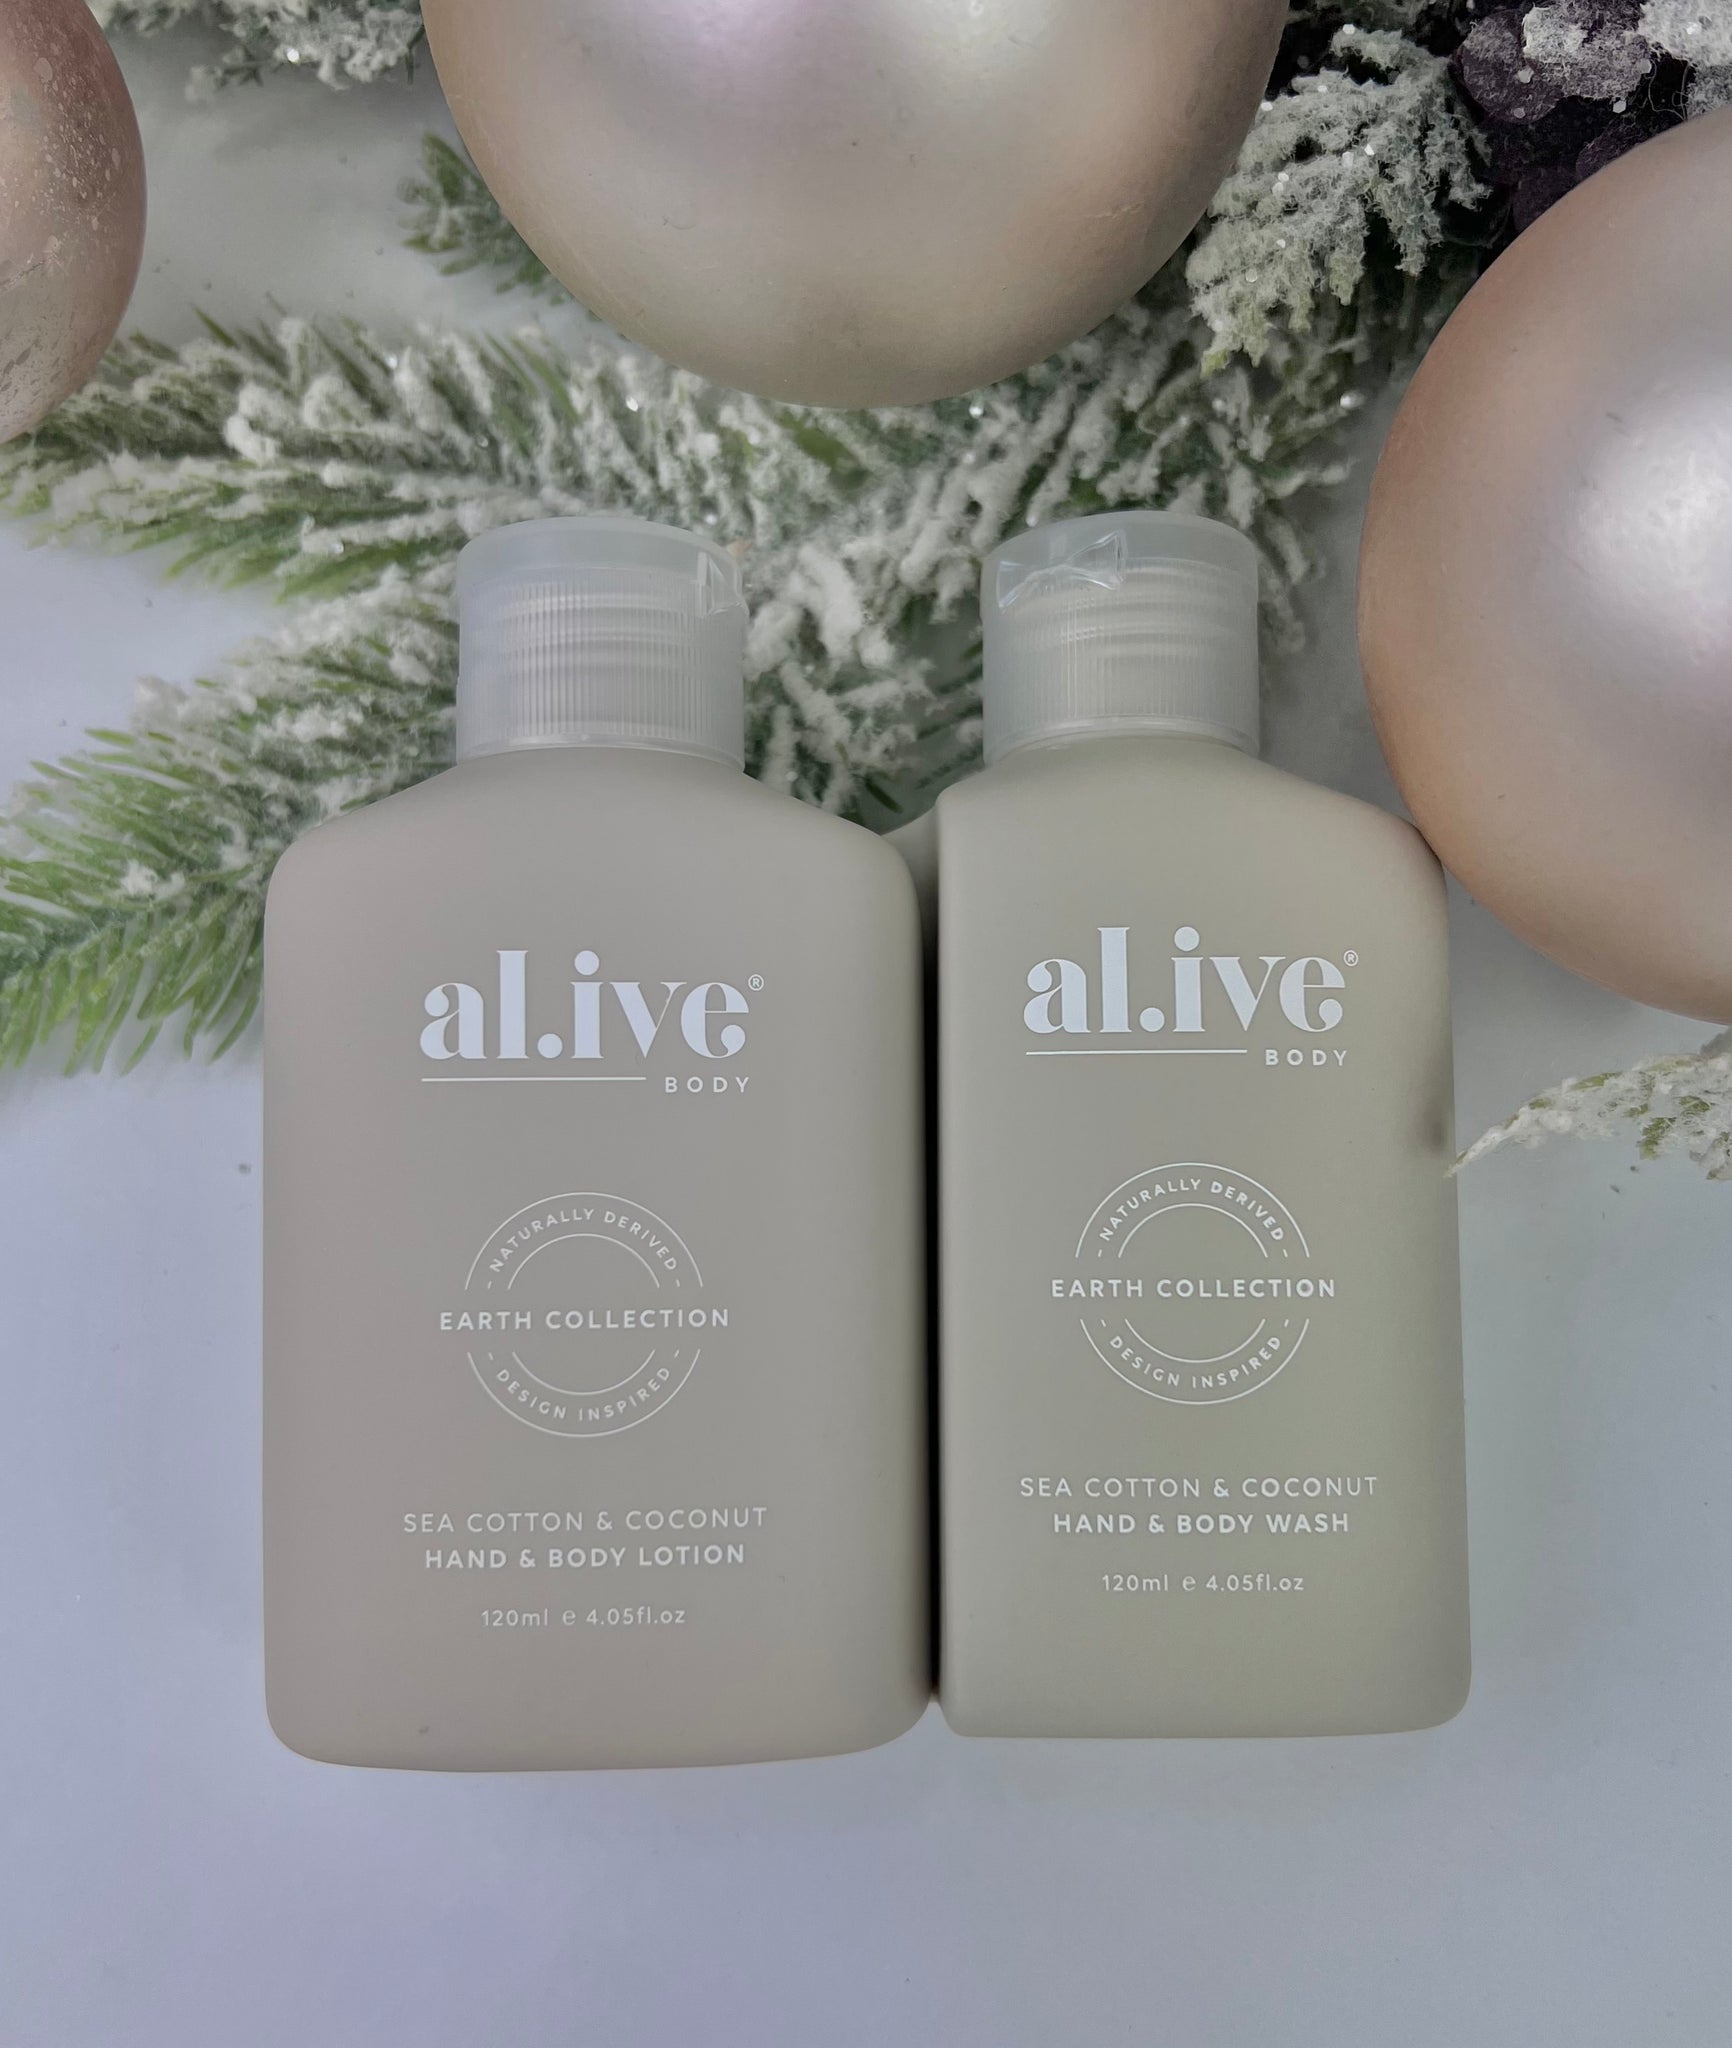 AL.IVE - HOLIDAY EDITION BODY CARE TRAVEL GIFT SET